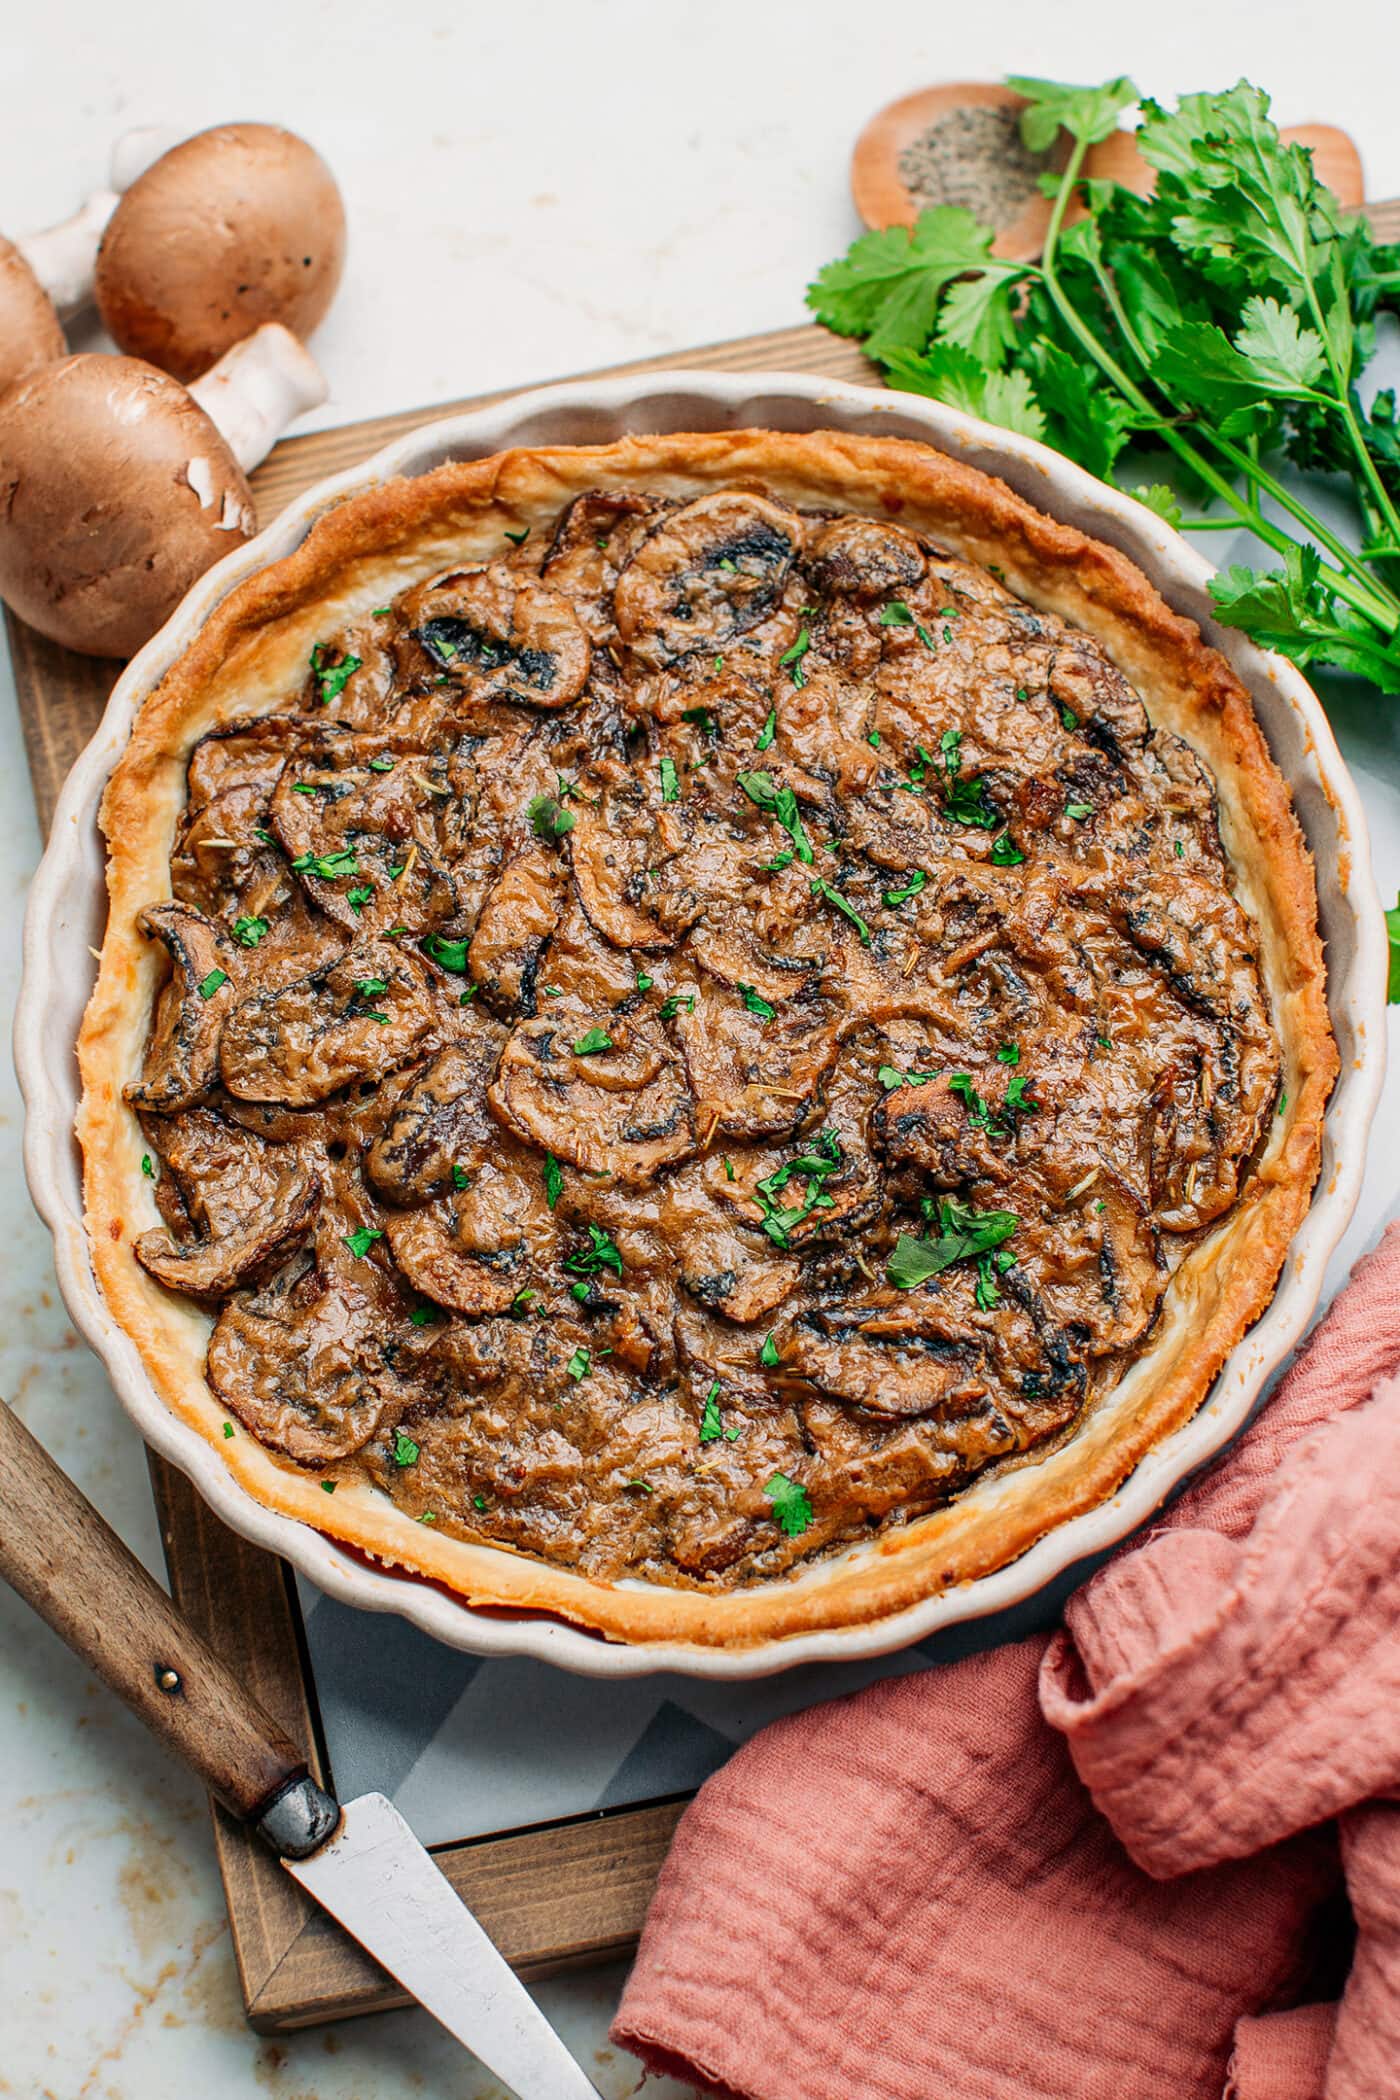 Mushroom tart in a pan topped with chopped cilantro.